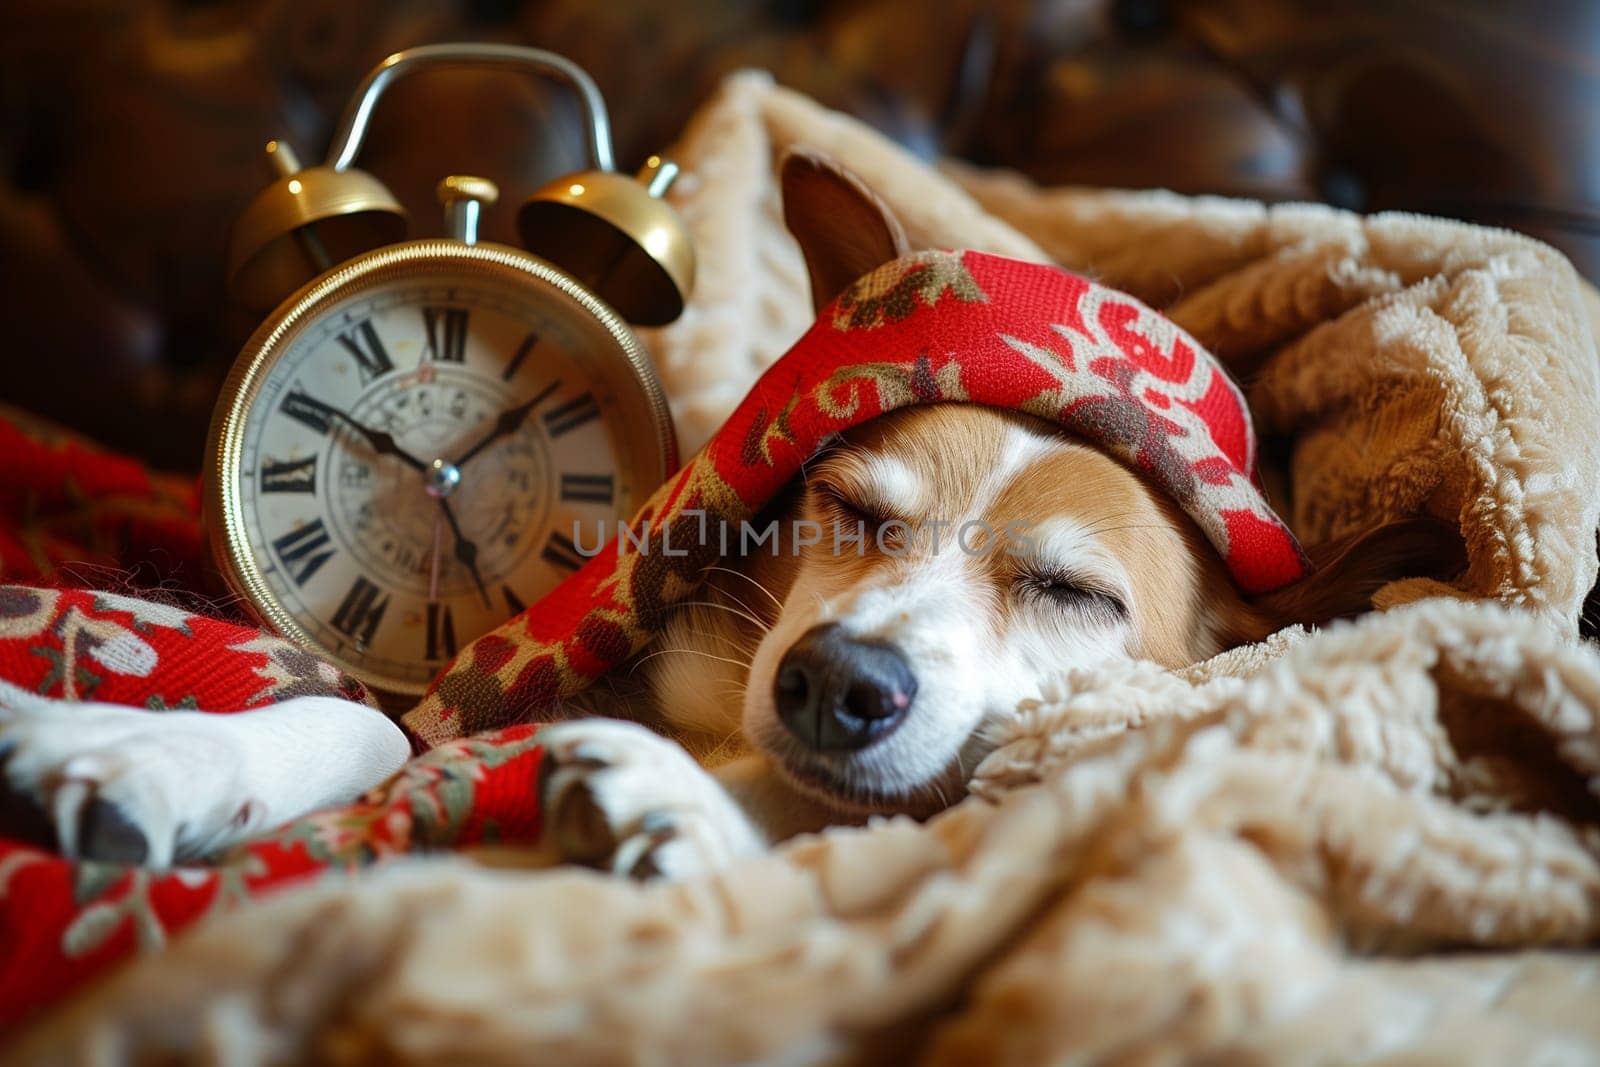 A domestic dog is peacefully sleeping next to an alarm clock, indicating a moment of rest and relaxation in a typical household setting.